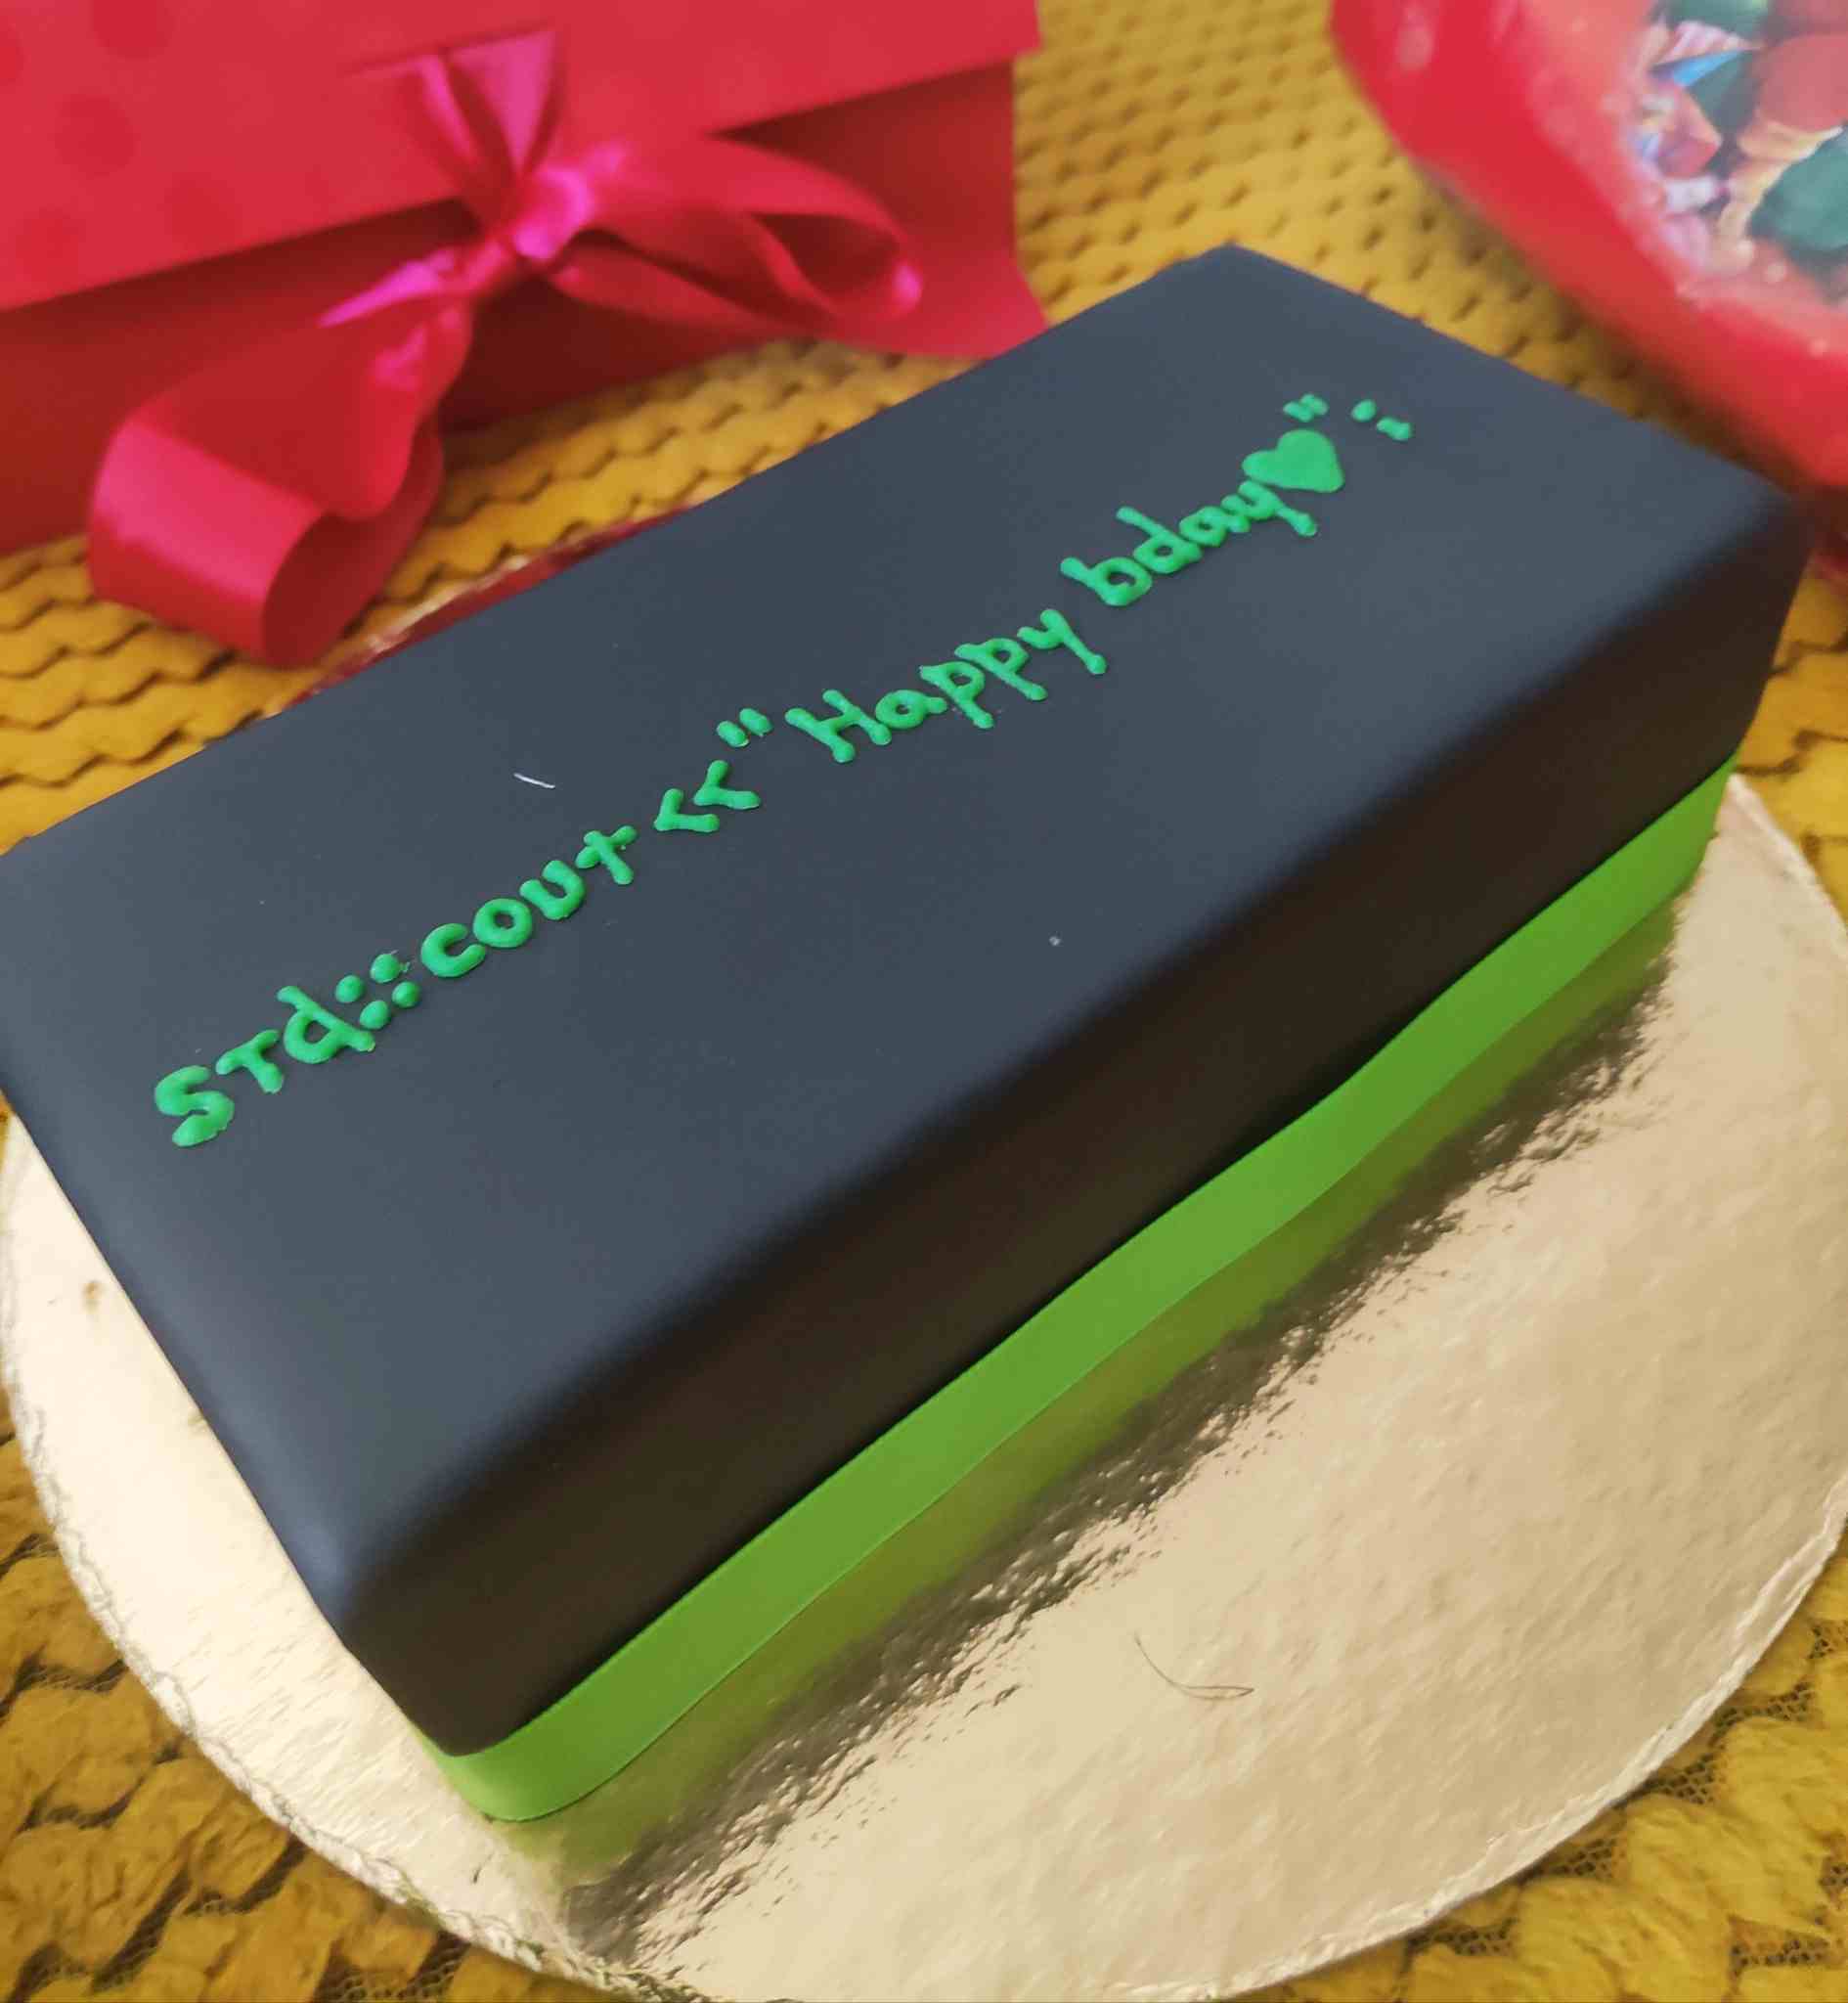 The C++ cake I've given to my boyfriend for birthday